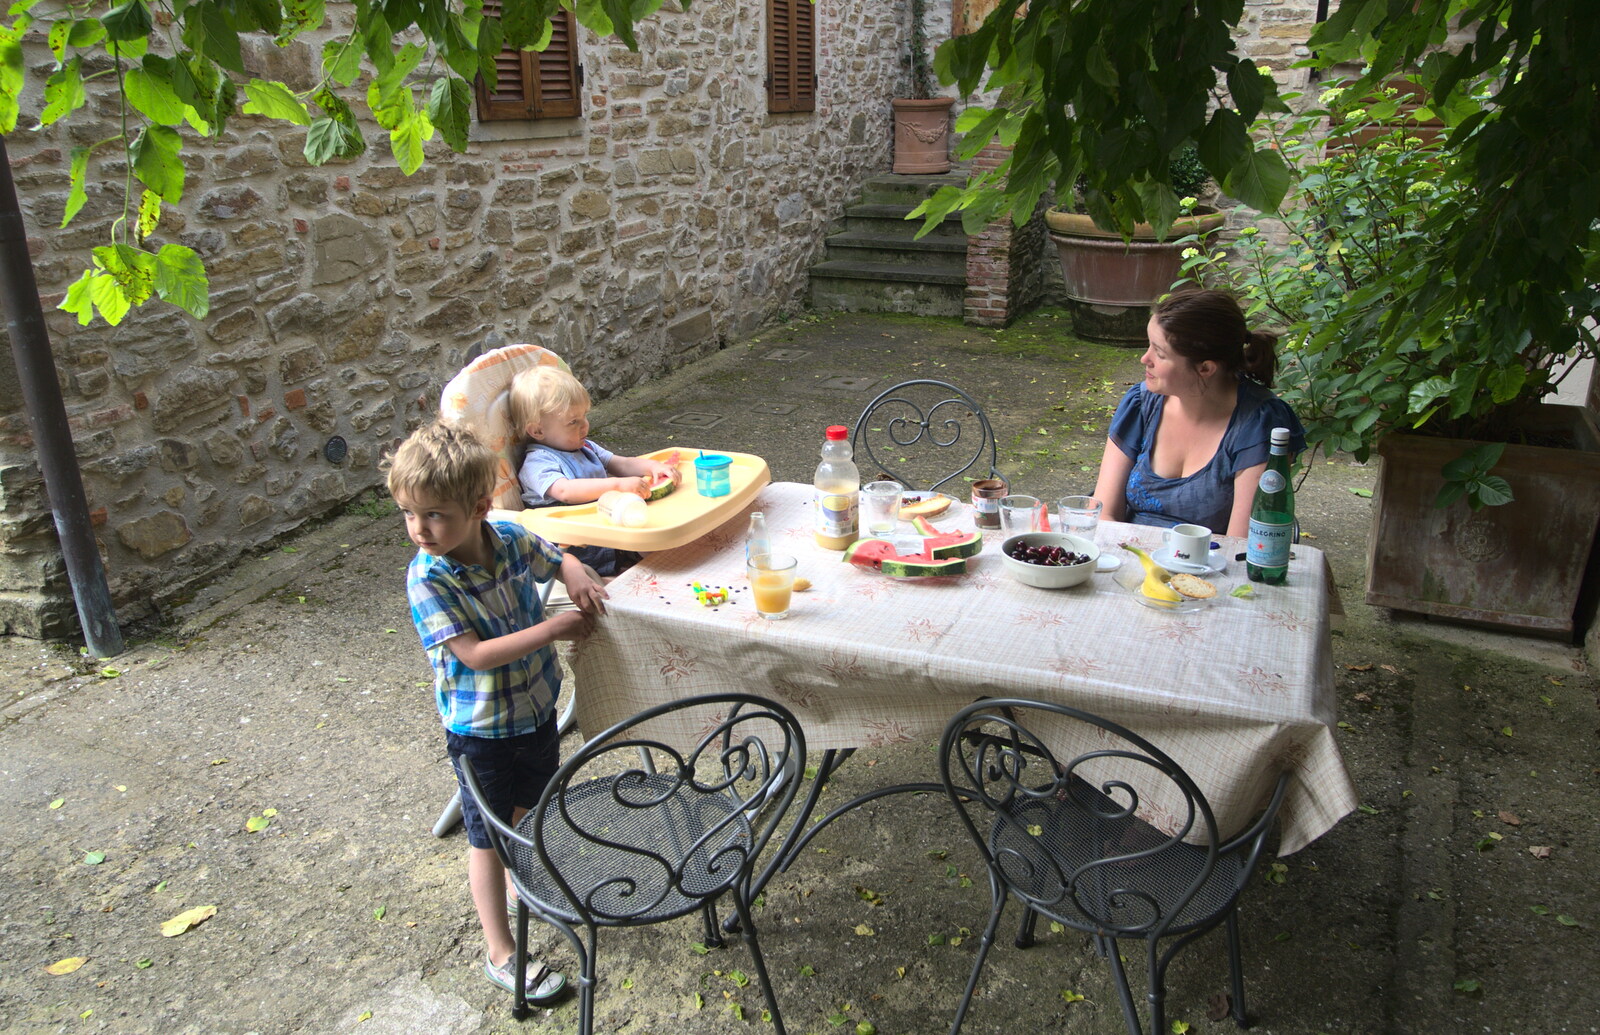 A Tuscan Winery and a Trip to Siena, Tuscany, Italy - 10th June 2013: The breakfast table